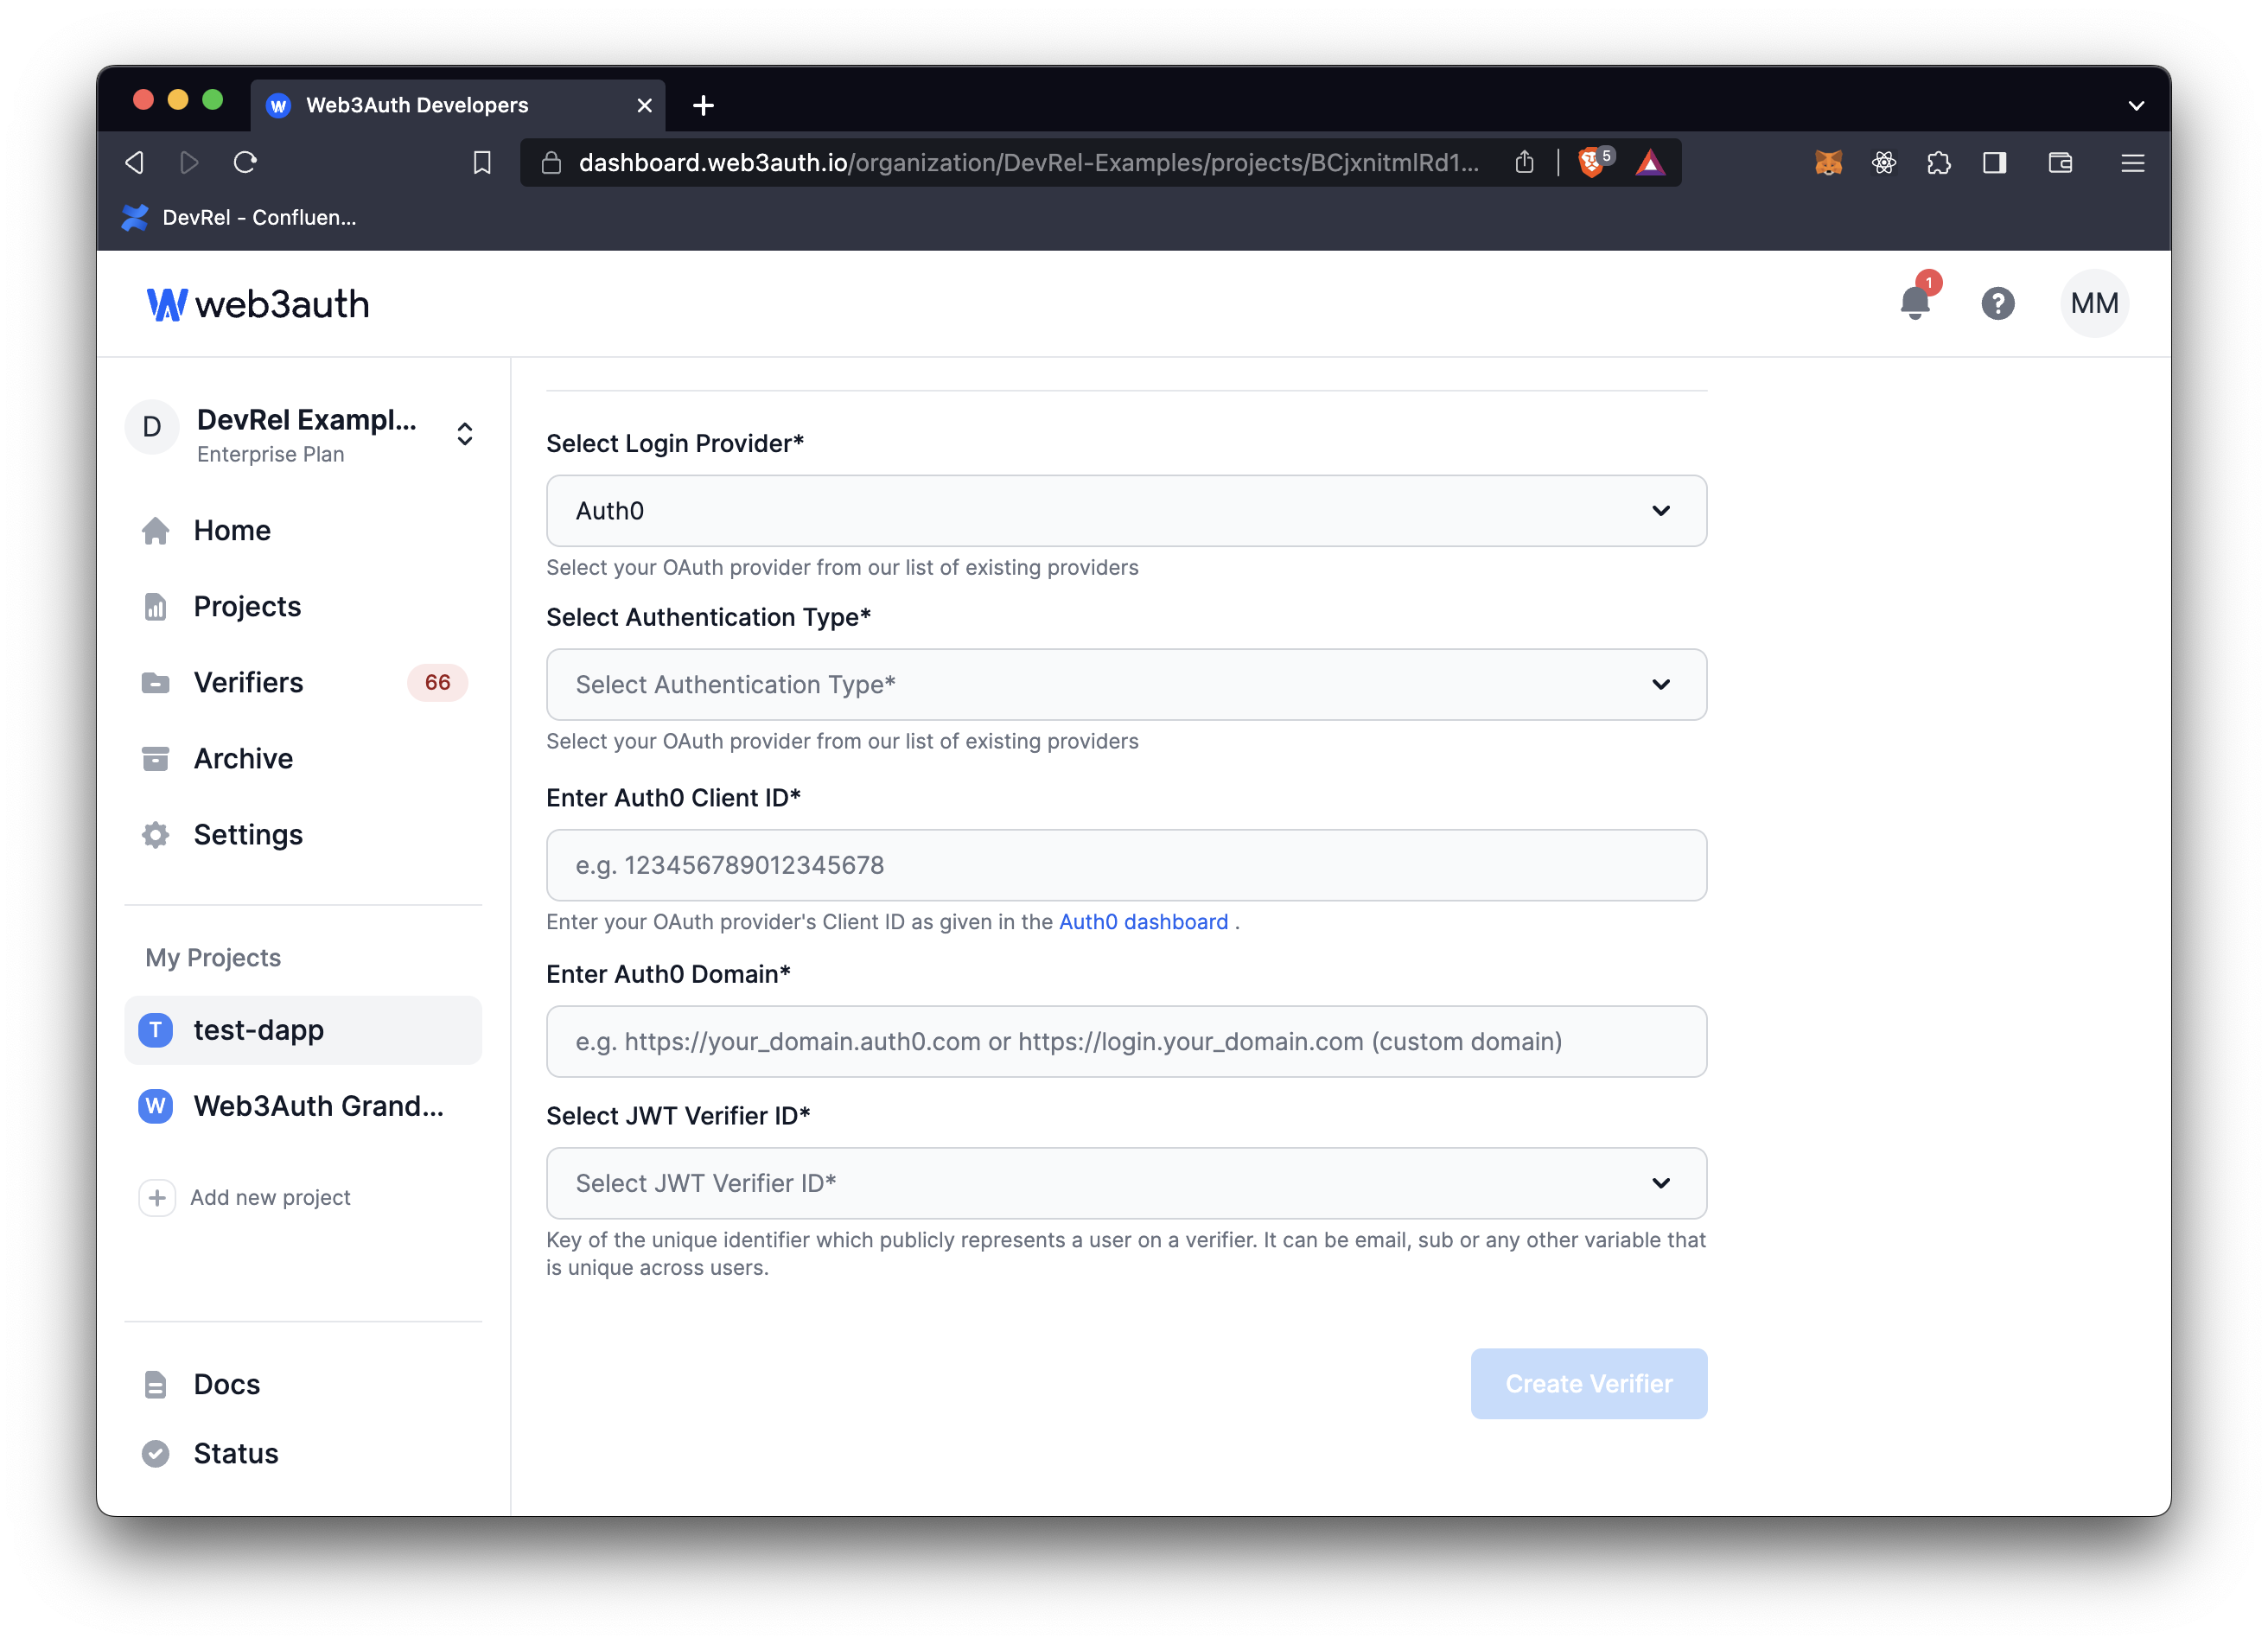 Twitch - Auth0 Client ID and Auth0 Domain on Web3Auth Dashboard